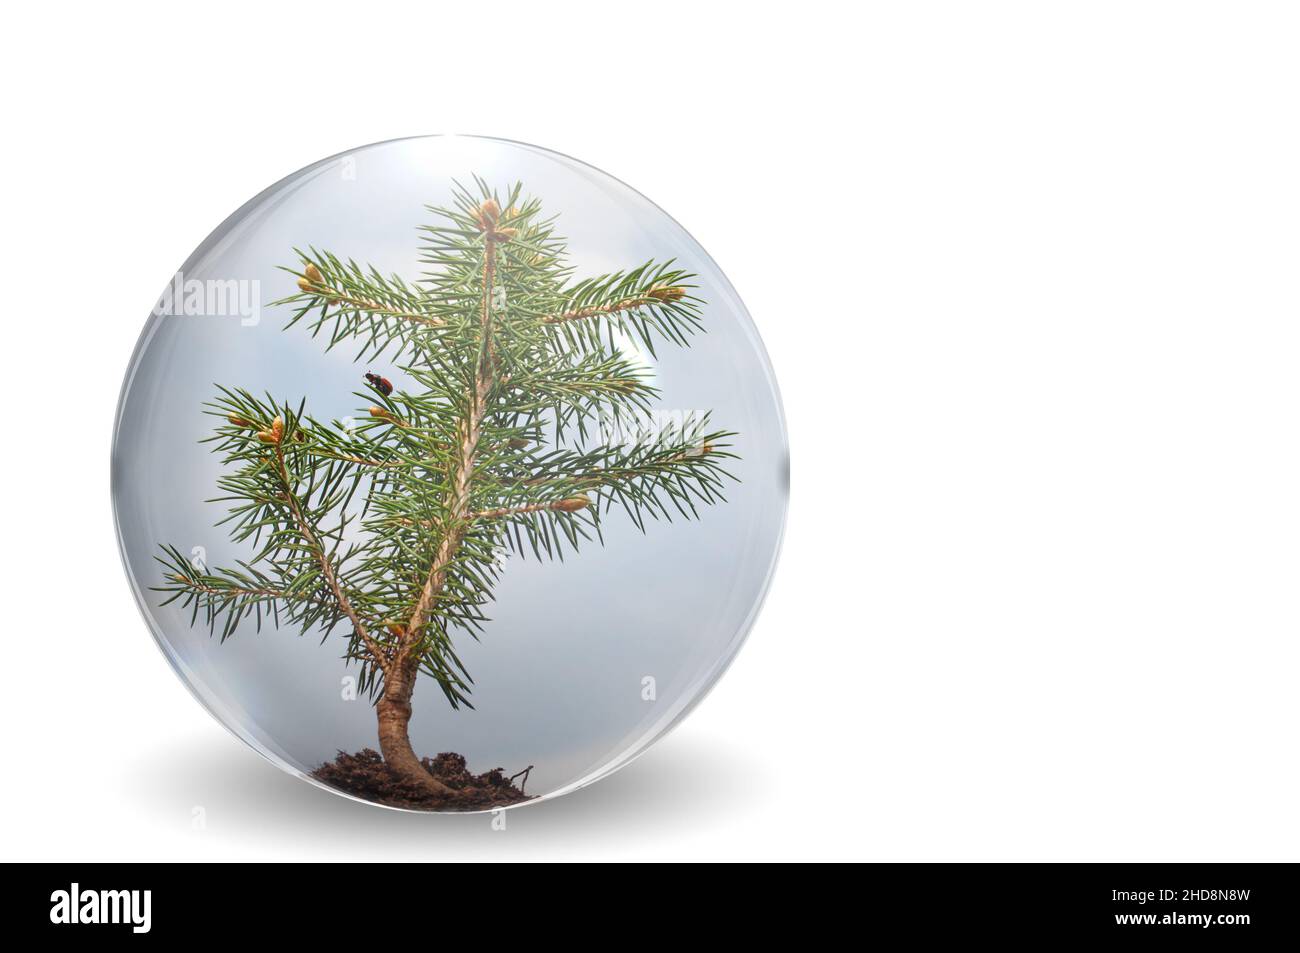 Spruce seedling in a glass ball, illustration Stock Photo